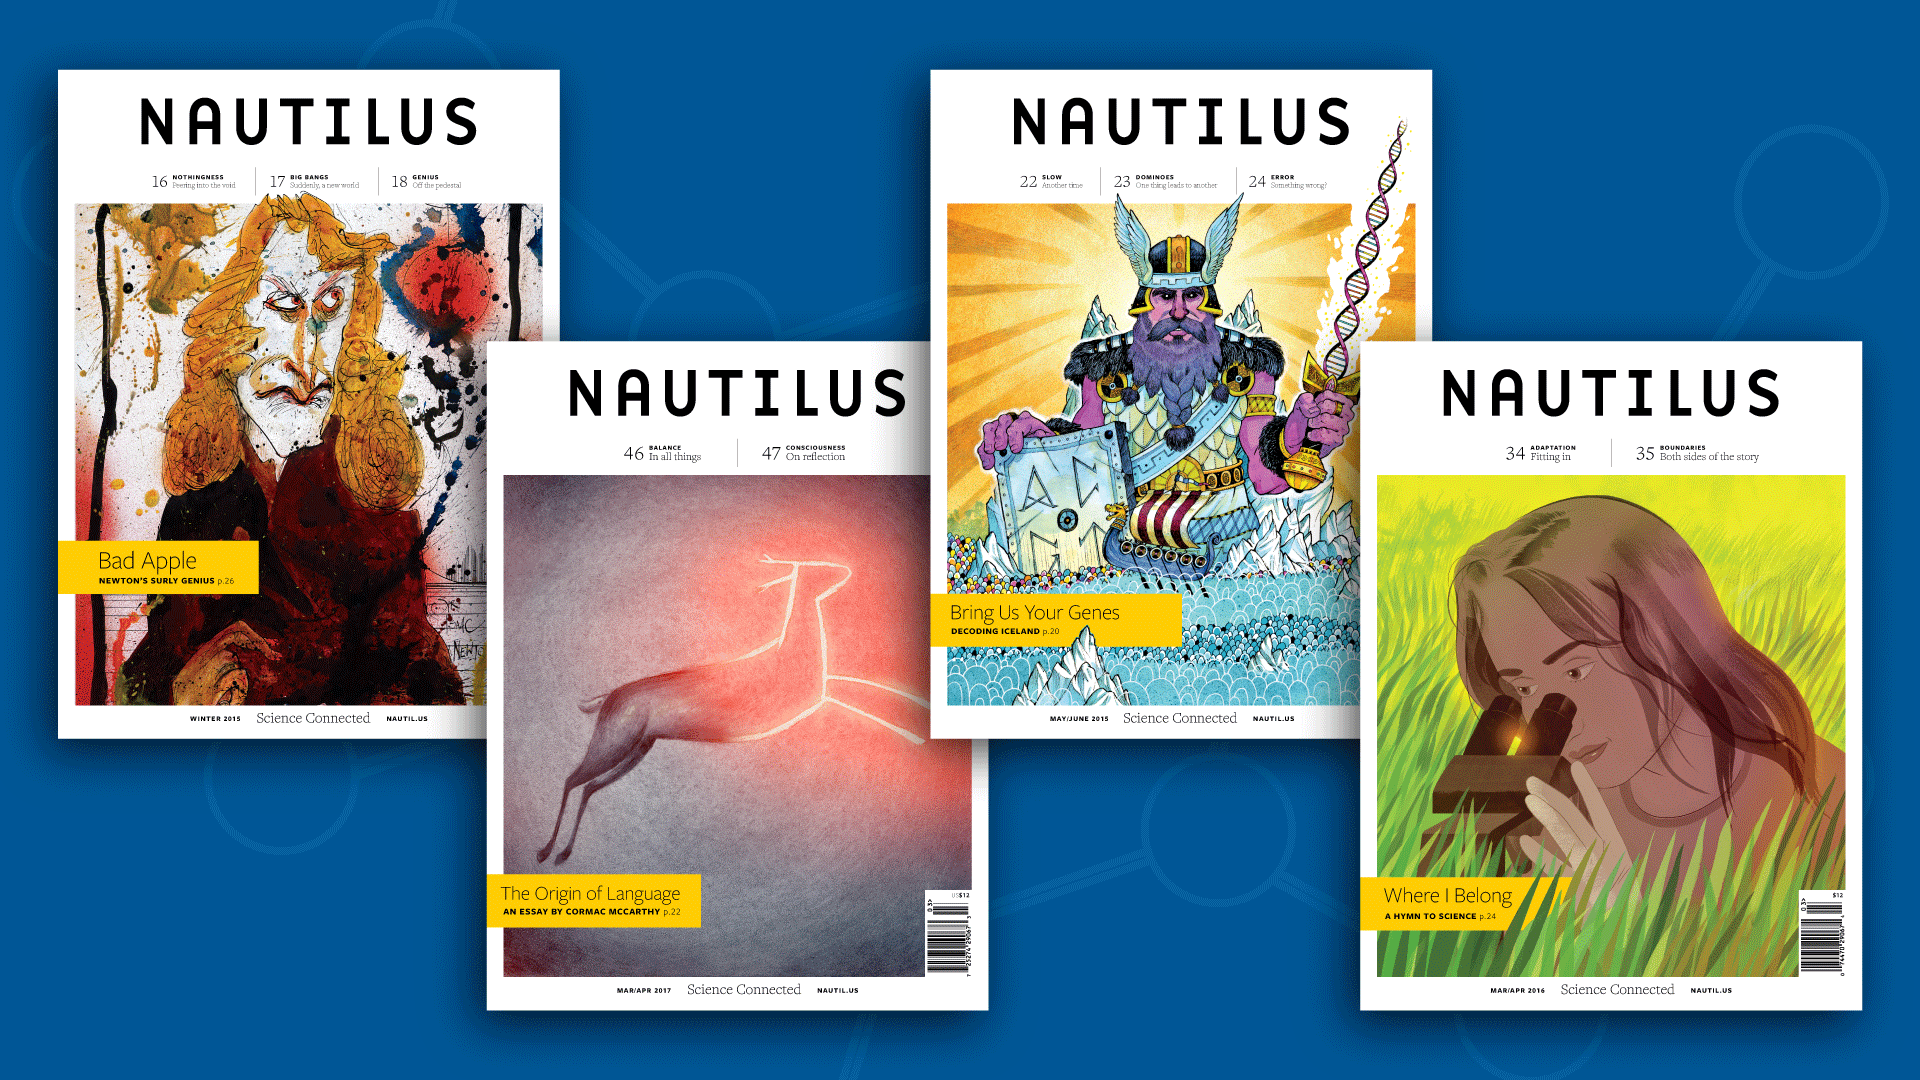 image of four Nautilus magazine covers on a blue background